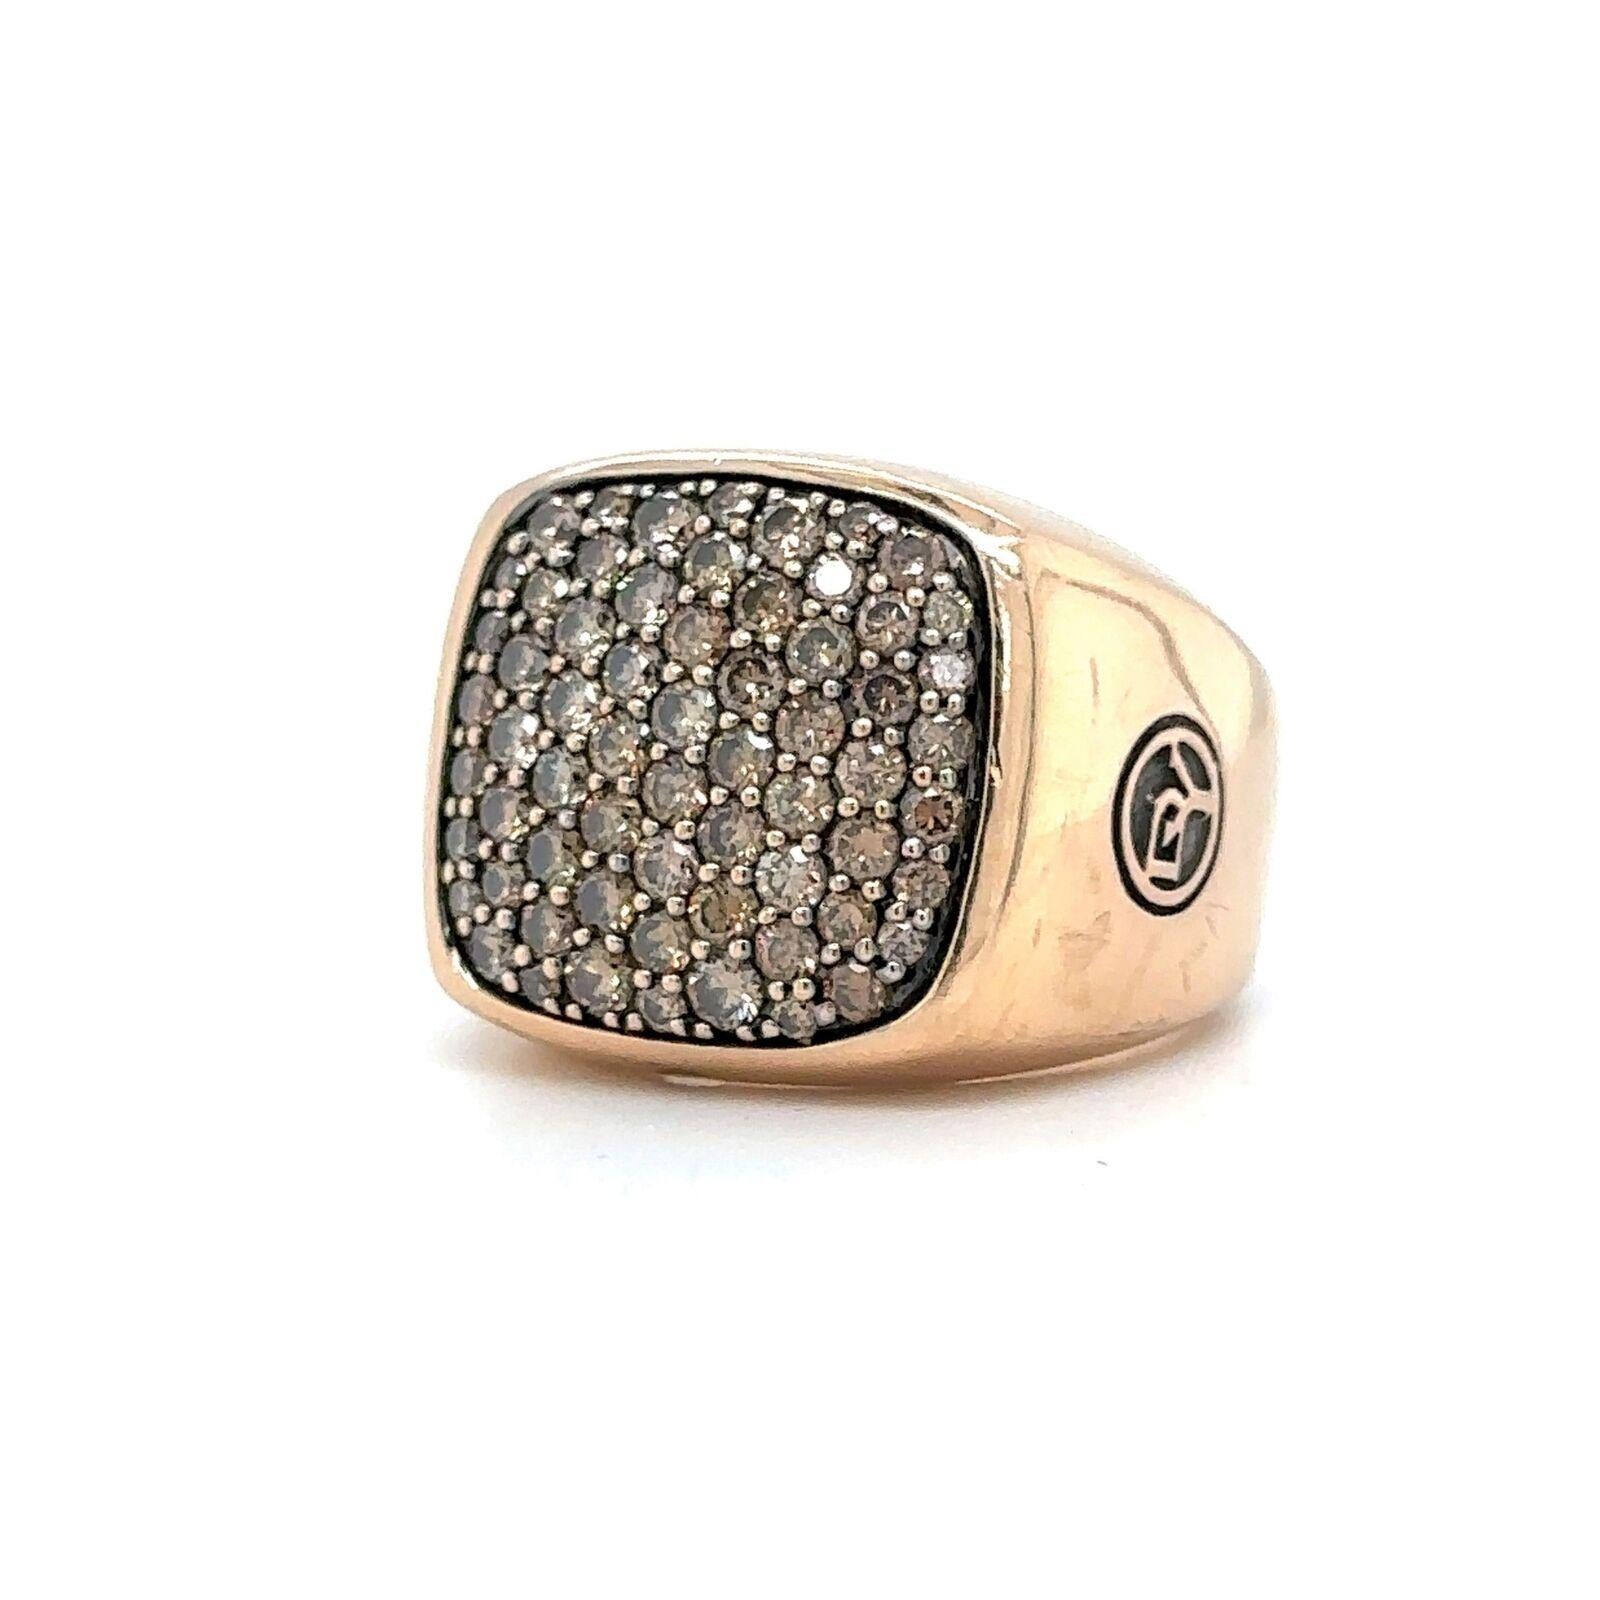 David Yurman Cognac 18k Rose Gold Diamond Streamline Signet Ring Size 7.75

Condition:  Excellent Condition, Professionally Cleaned and Polished
Metal:  18k Gold (Marked, and Professionally Tested)
Weight:  29.2g
Diamonds:  Round Cut Cognac Diamonds